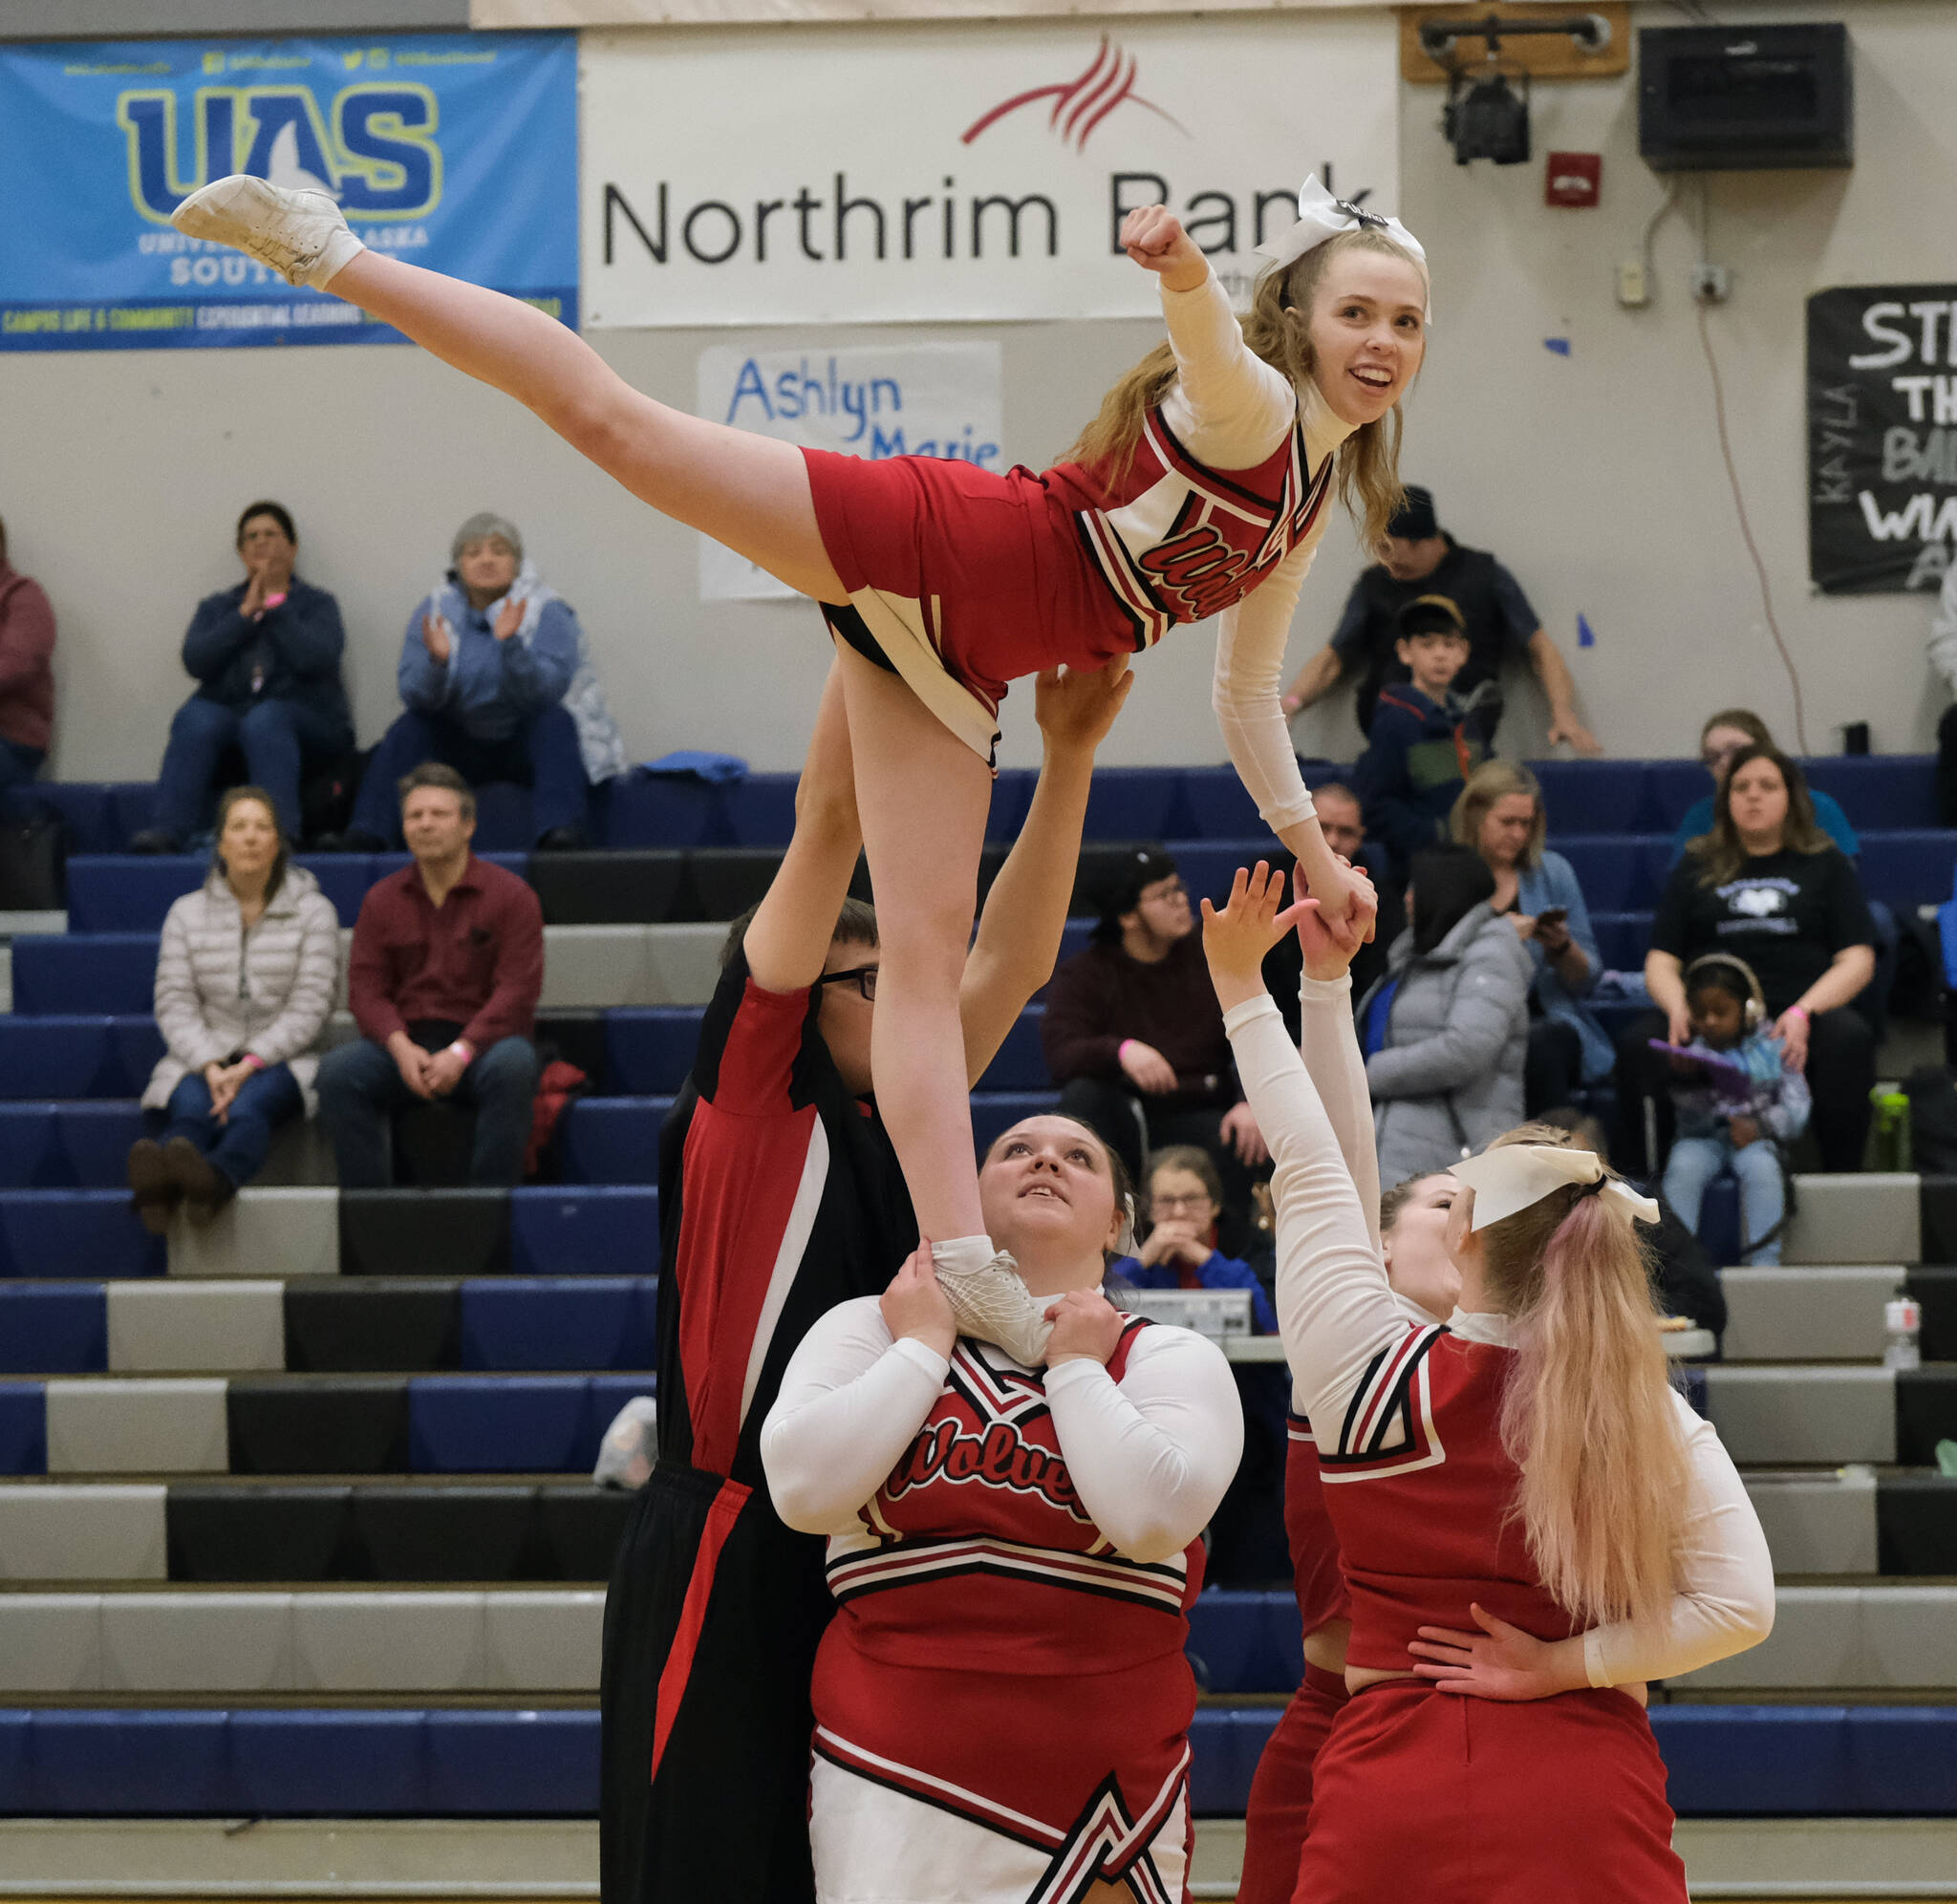 Members of the Wrangell cheer team perform Wednesday at the Region V tournament. (Klas Stolpe / For the Juneau Empire)